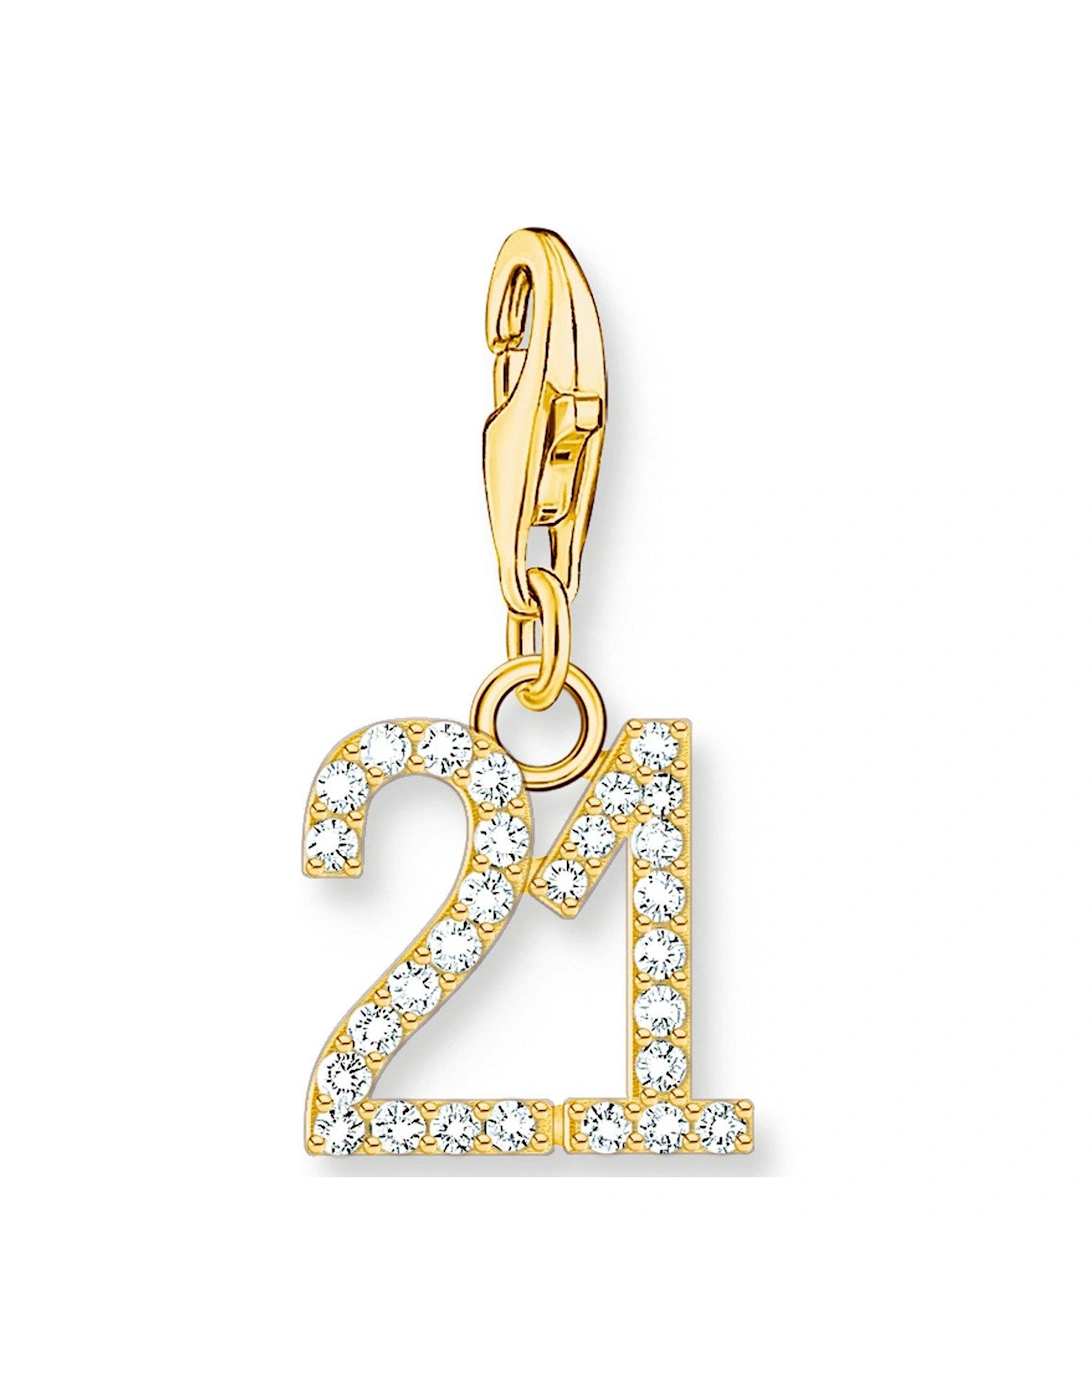 Charm Number 21 - 925 Silver, 750 Gold Plating & Hand-Set Zirconia, 2 of 1